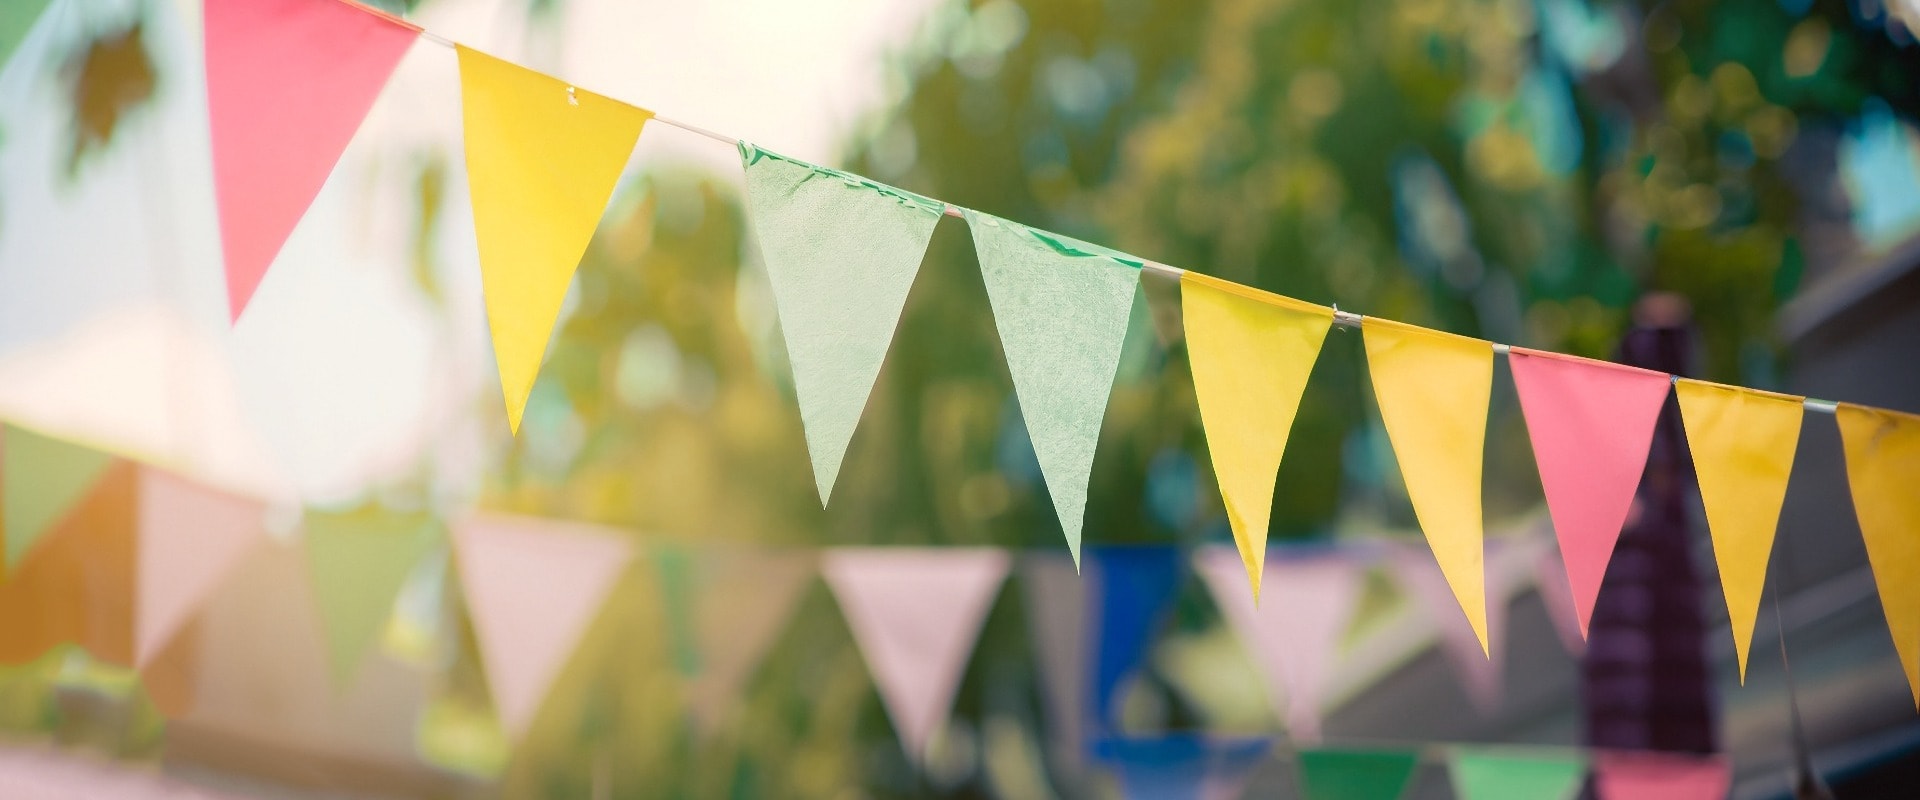 Blur background colorful triangular flags of decorated celebrate outdoor party, vintage tone.